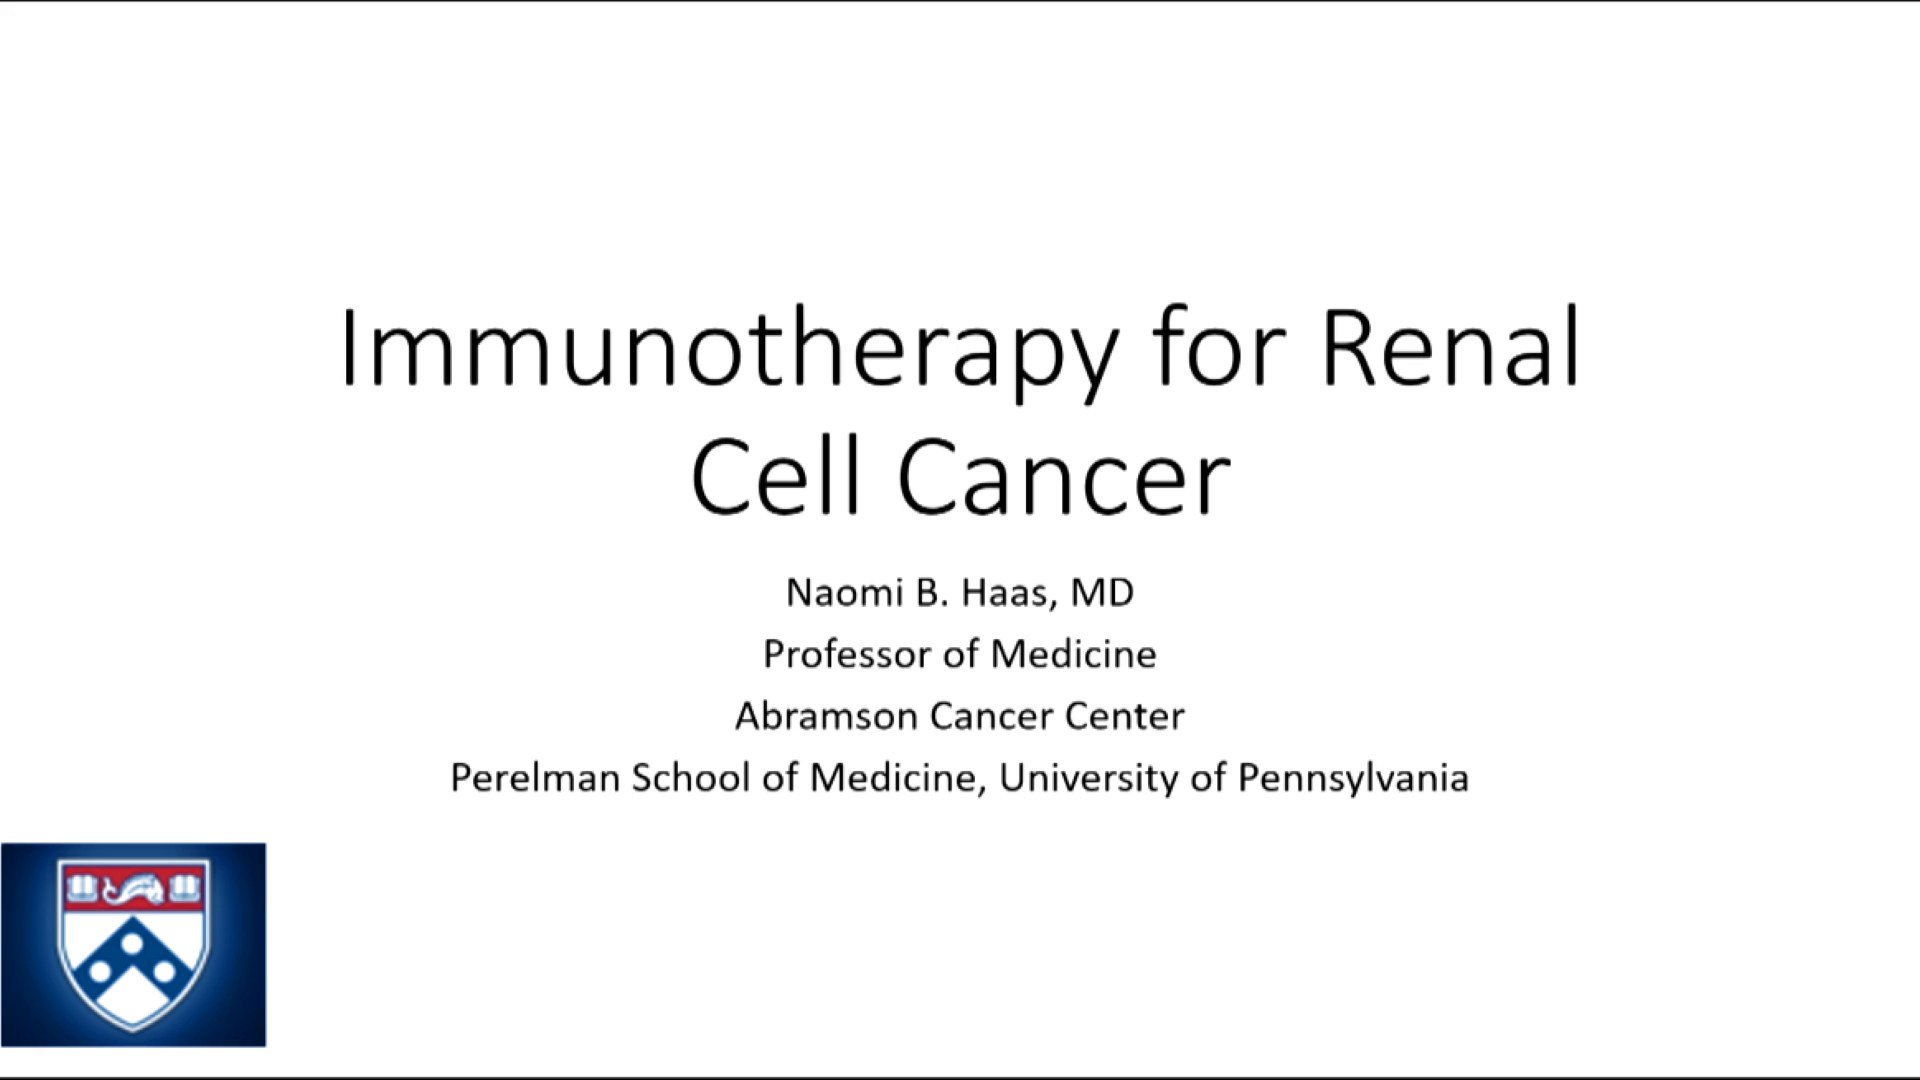 Update on Immunotherapy for Renal Cell Carcinoma